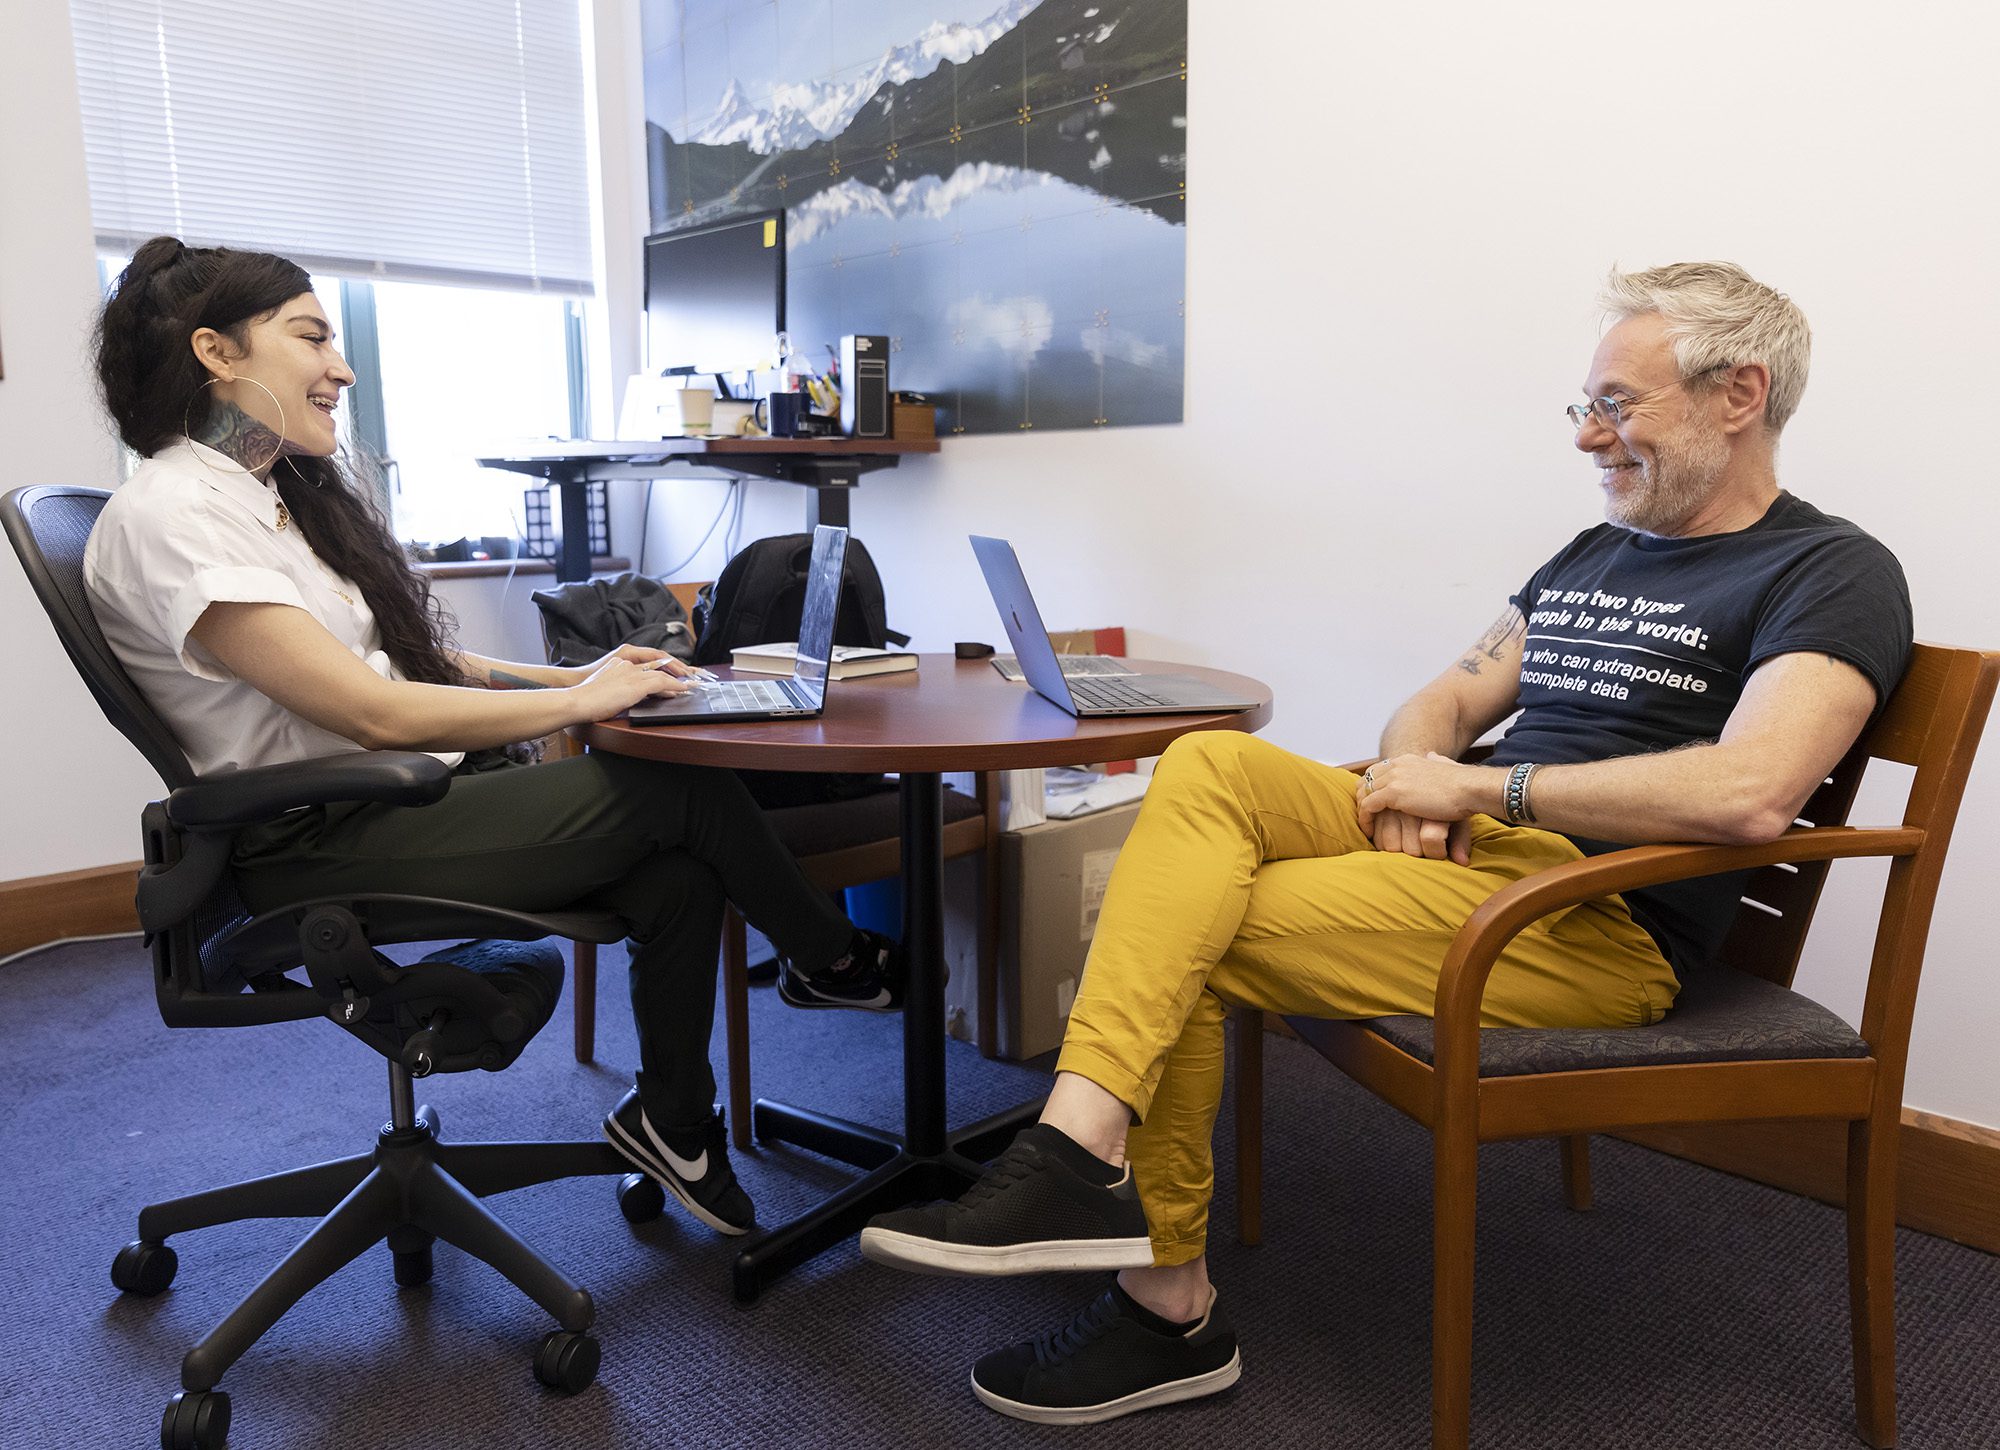 A woman with long dark hair wearing a white blouse sits in an office chair talking to a man wearing black t-shirt and yellow pants